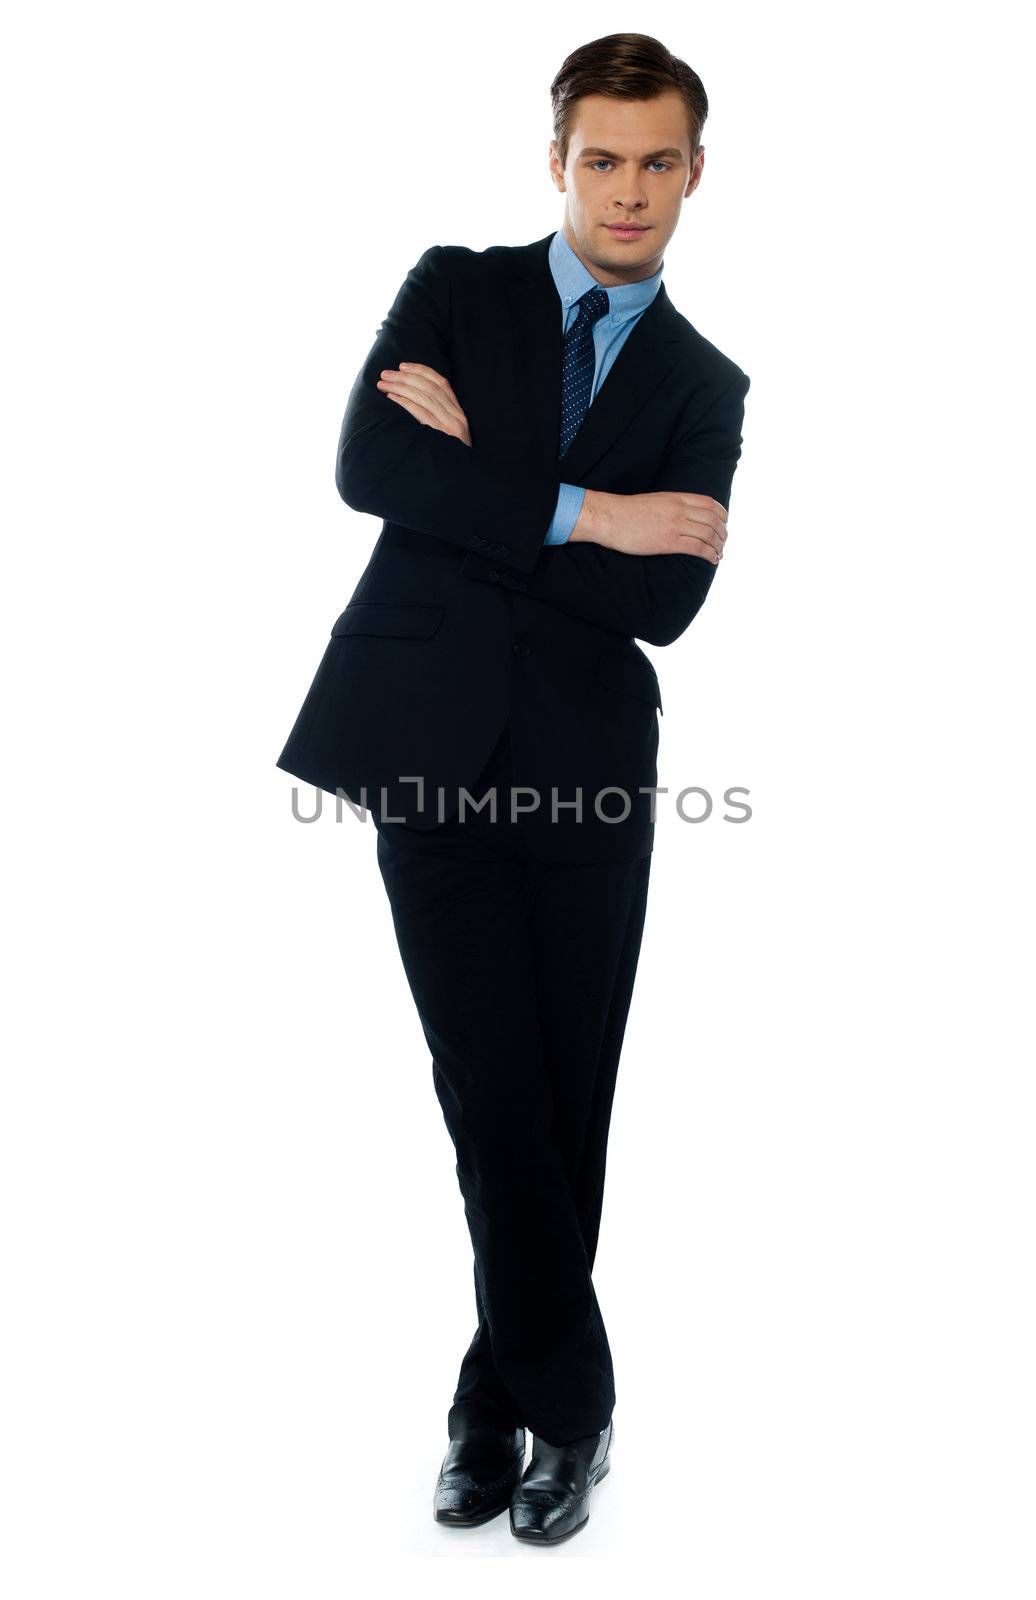 Handsome business executive tilting by stockyimages